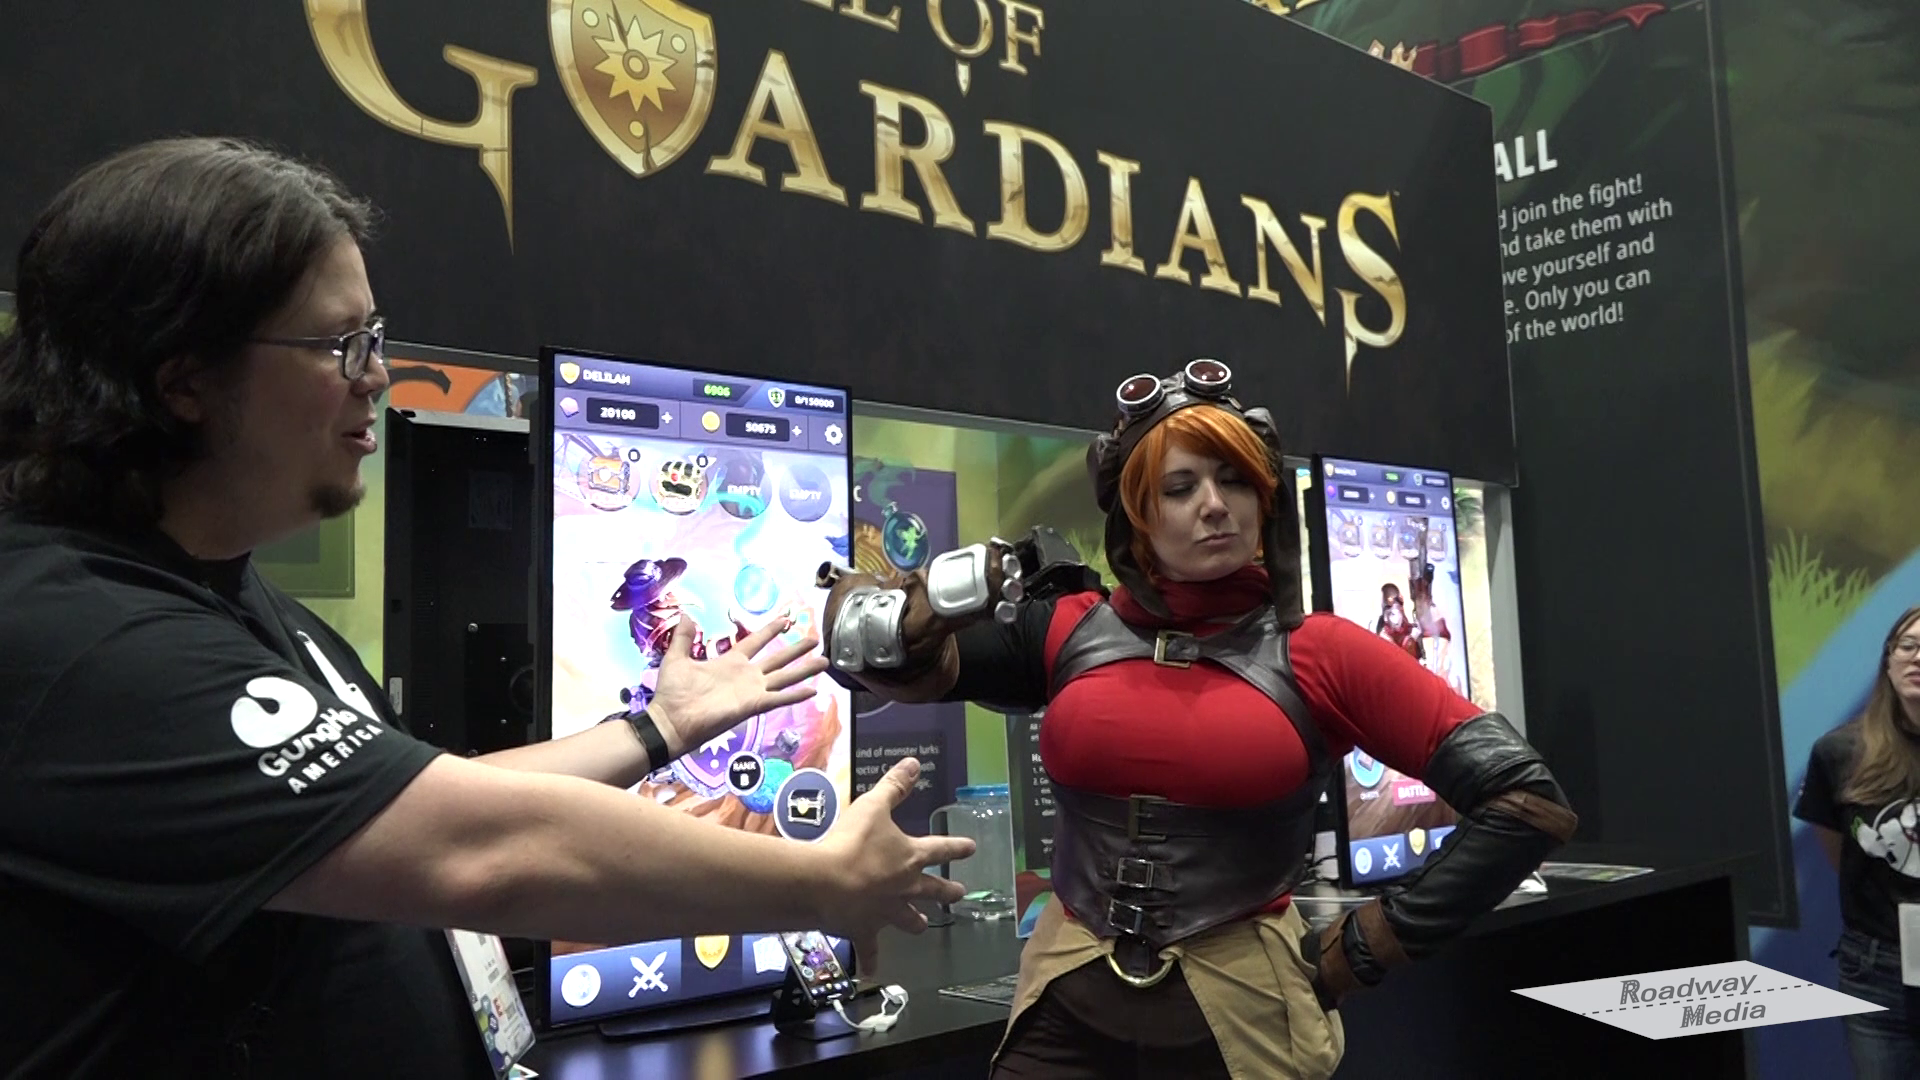 Call of Guardians for mobile devices at E3